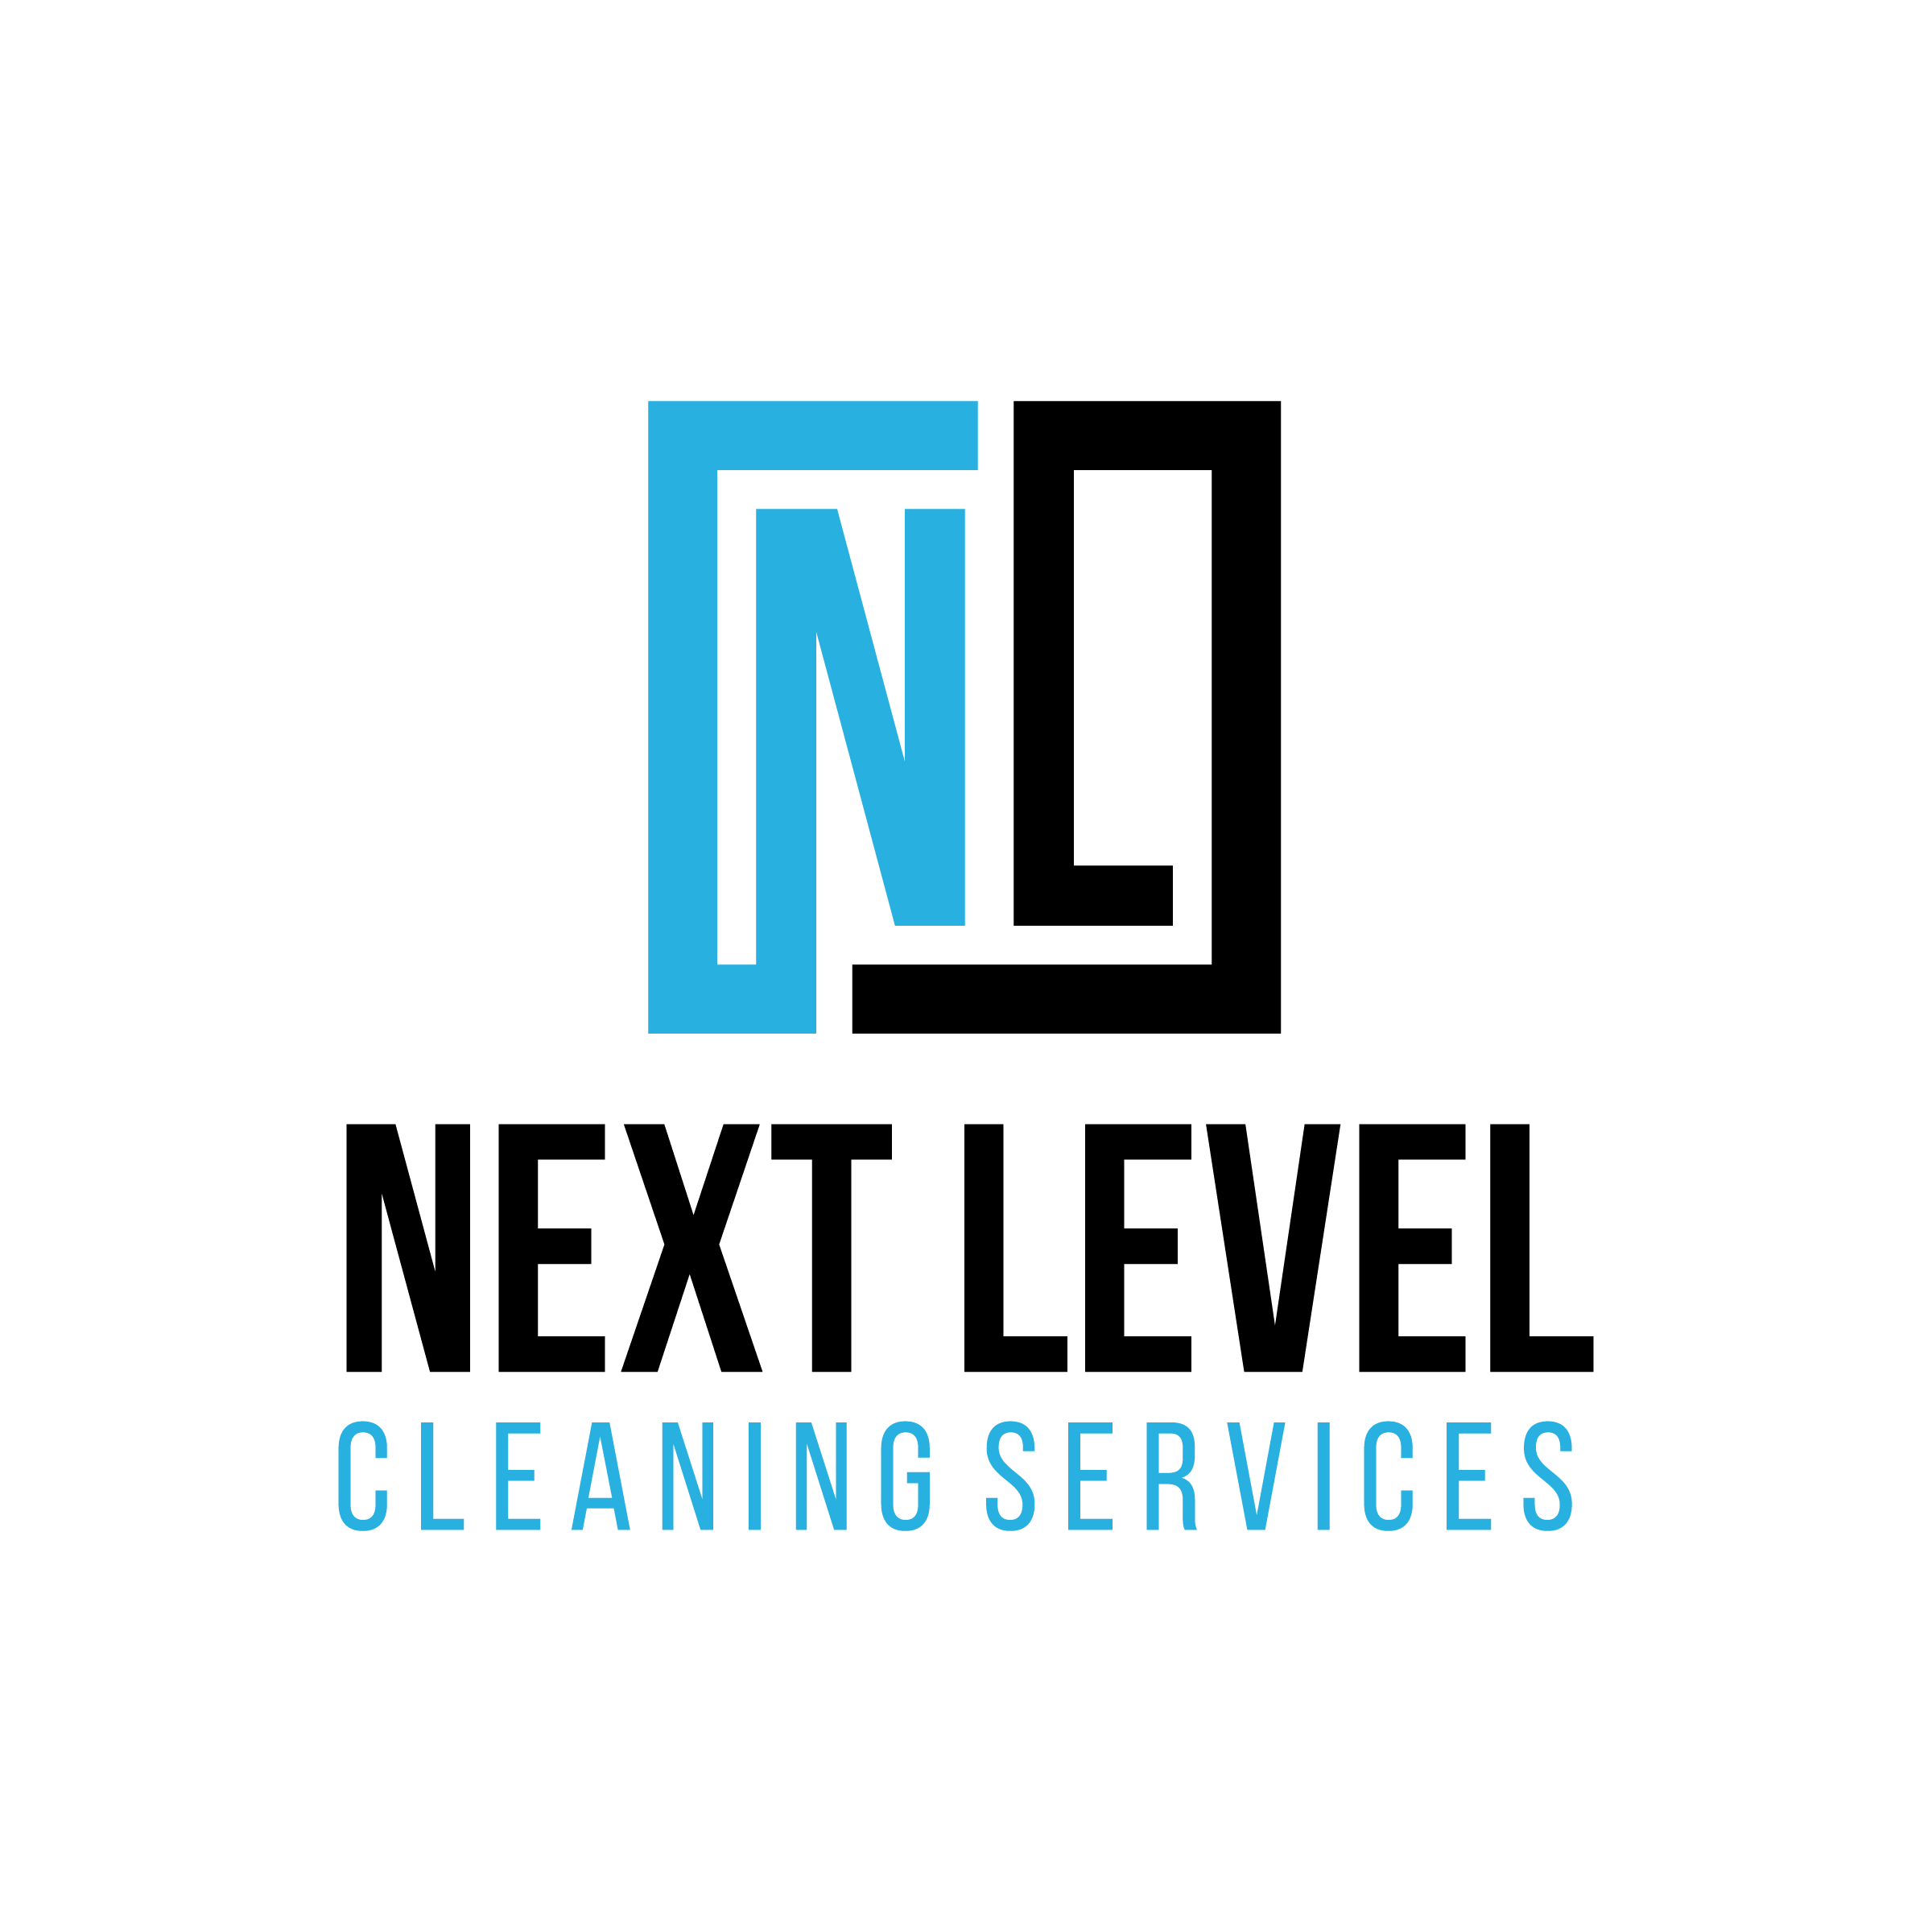 Lv Cleaning Services And Installation